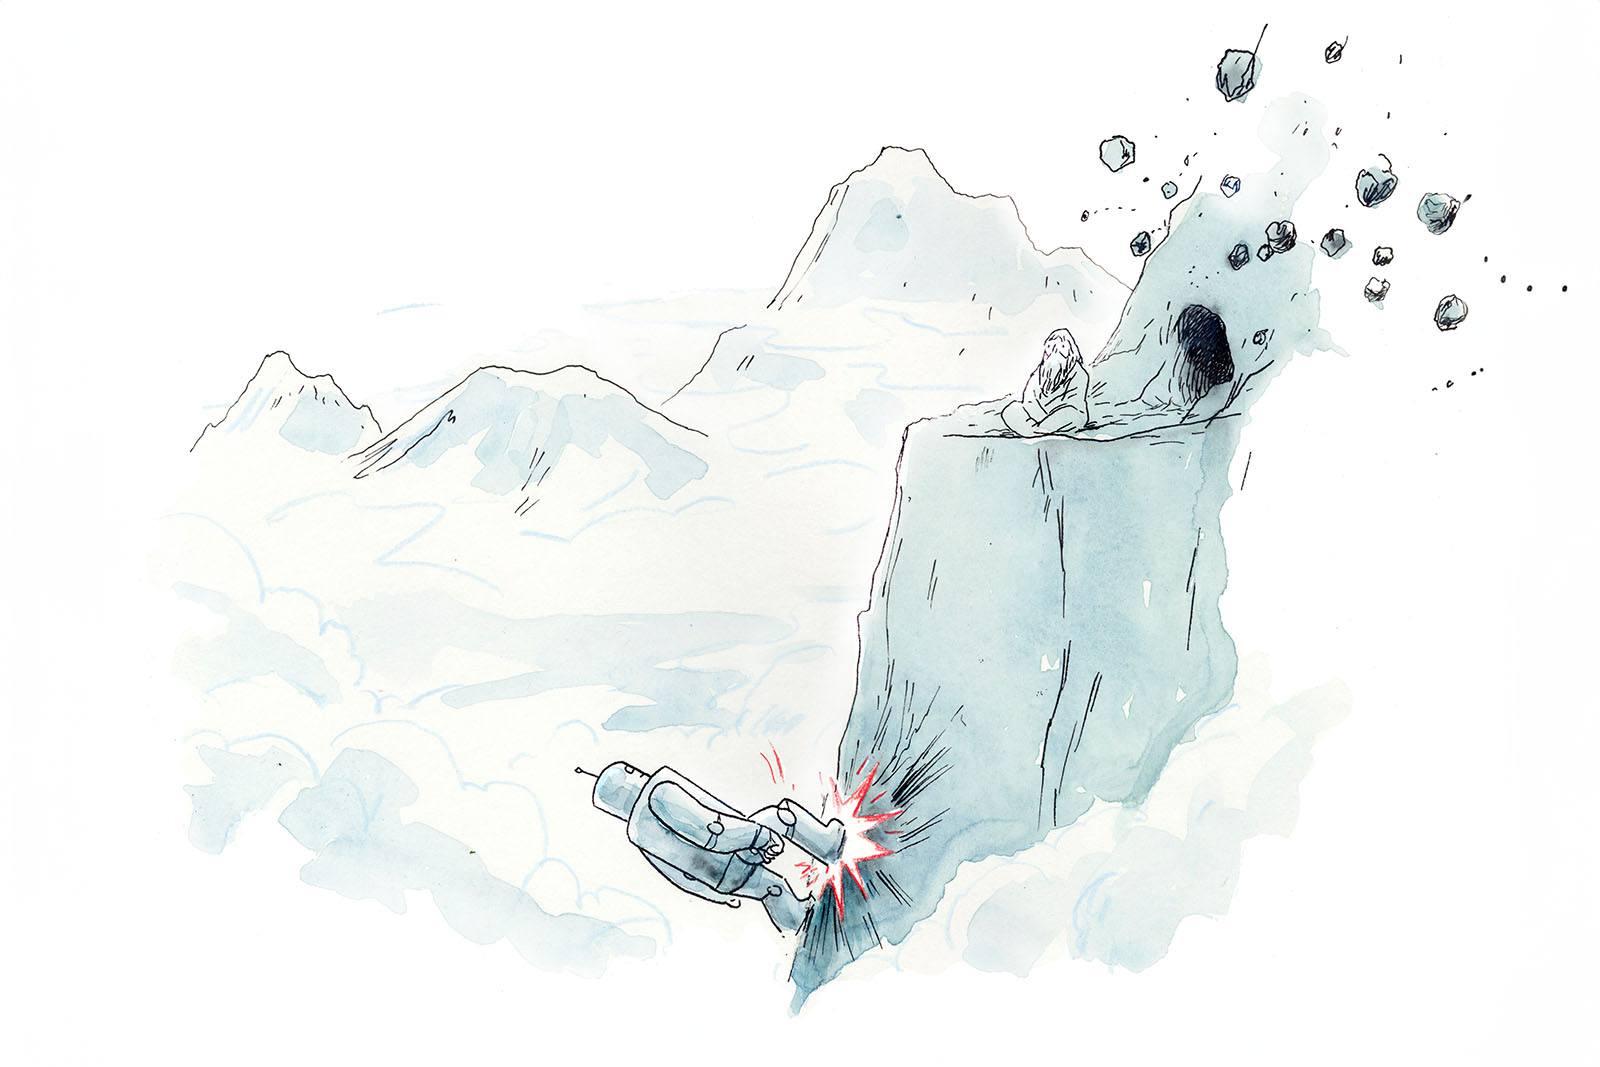 A giant robot walks up a mountainside towards a man sitting outside a cave as rocks from above shower down.